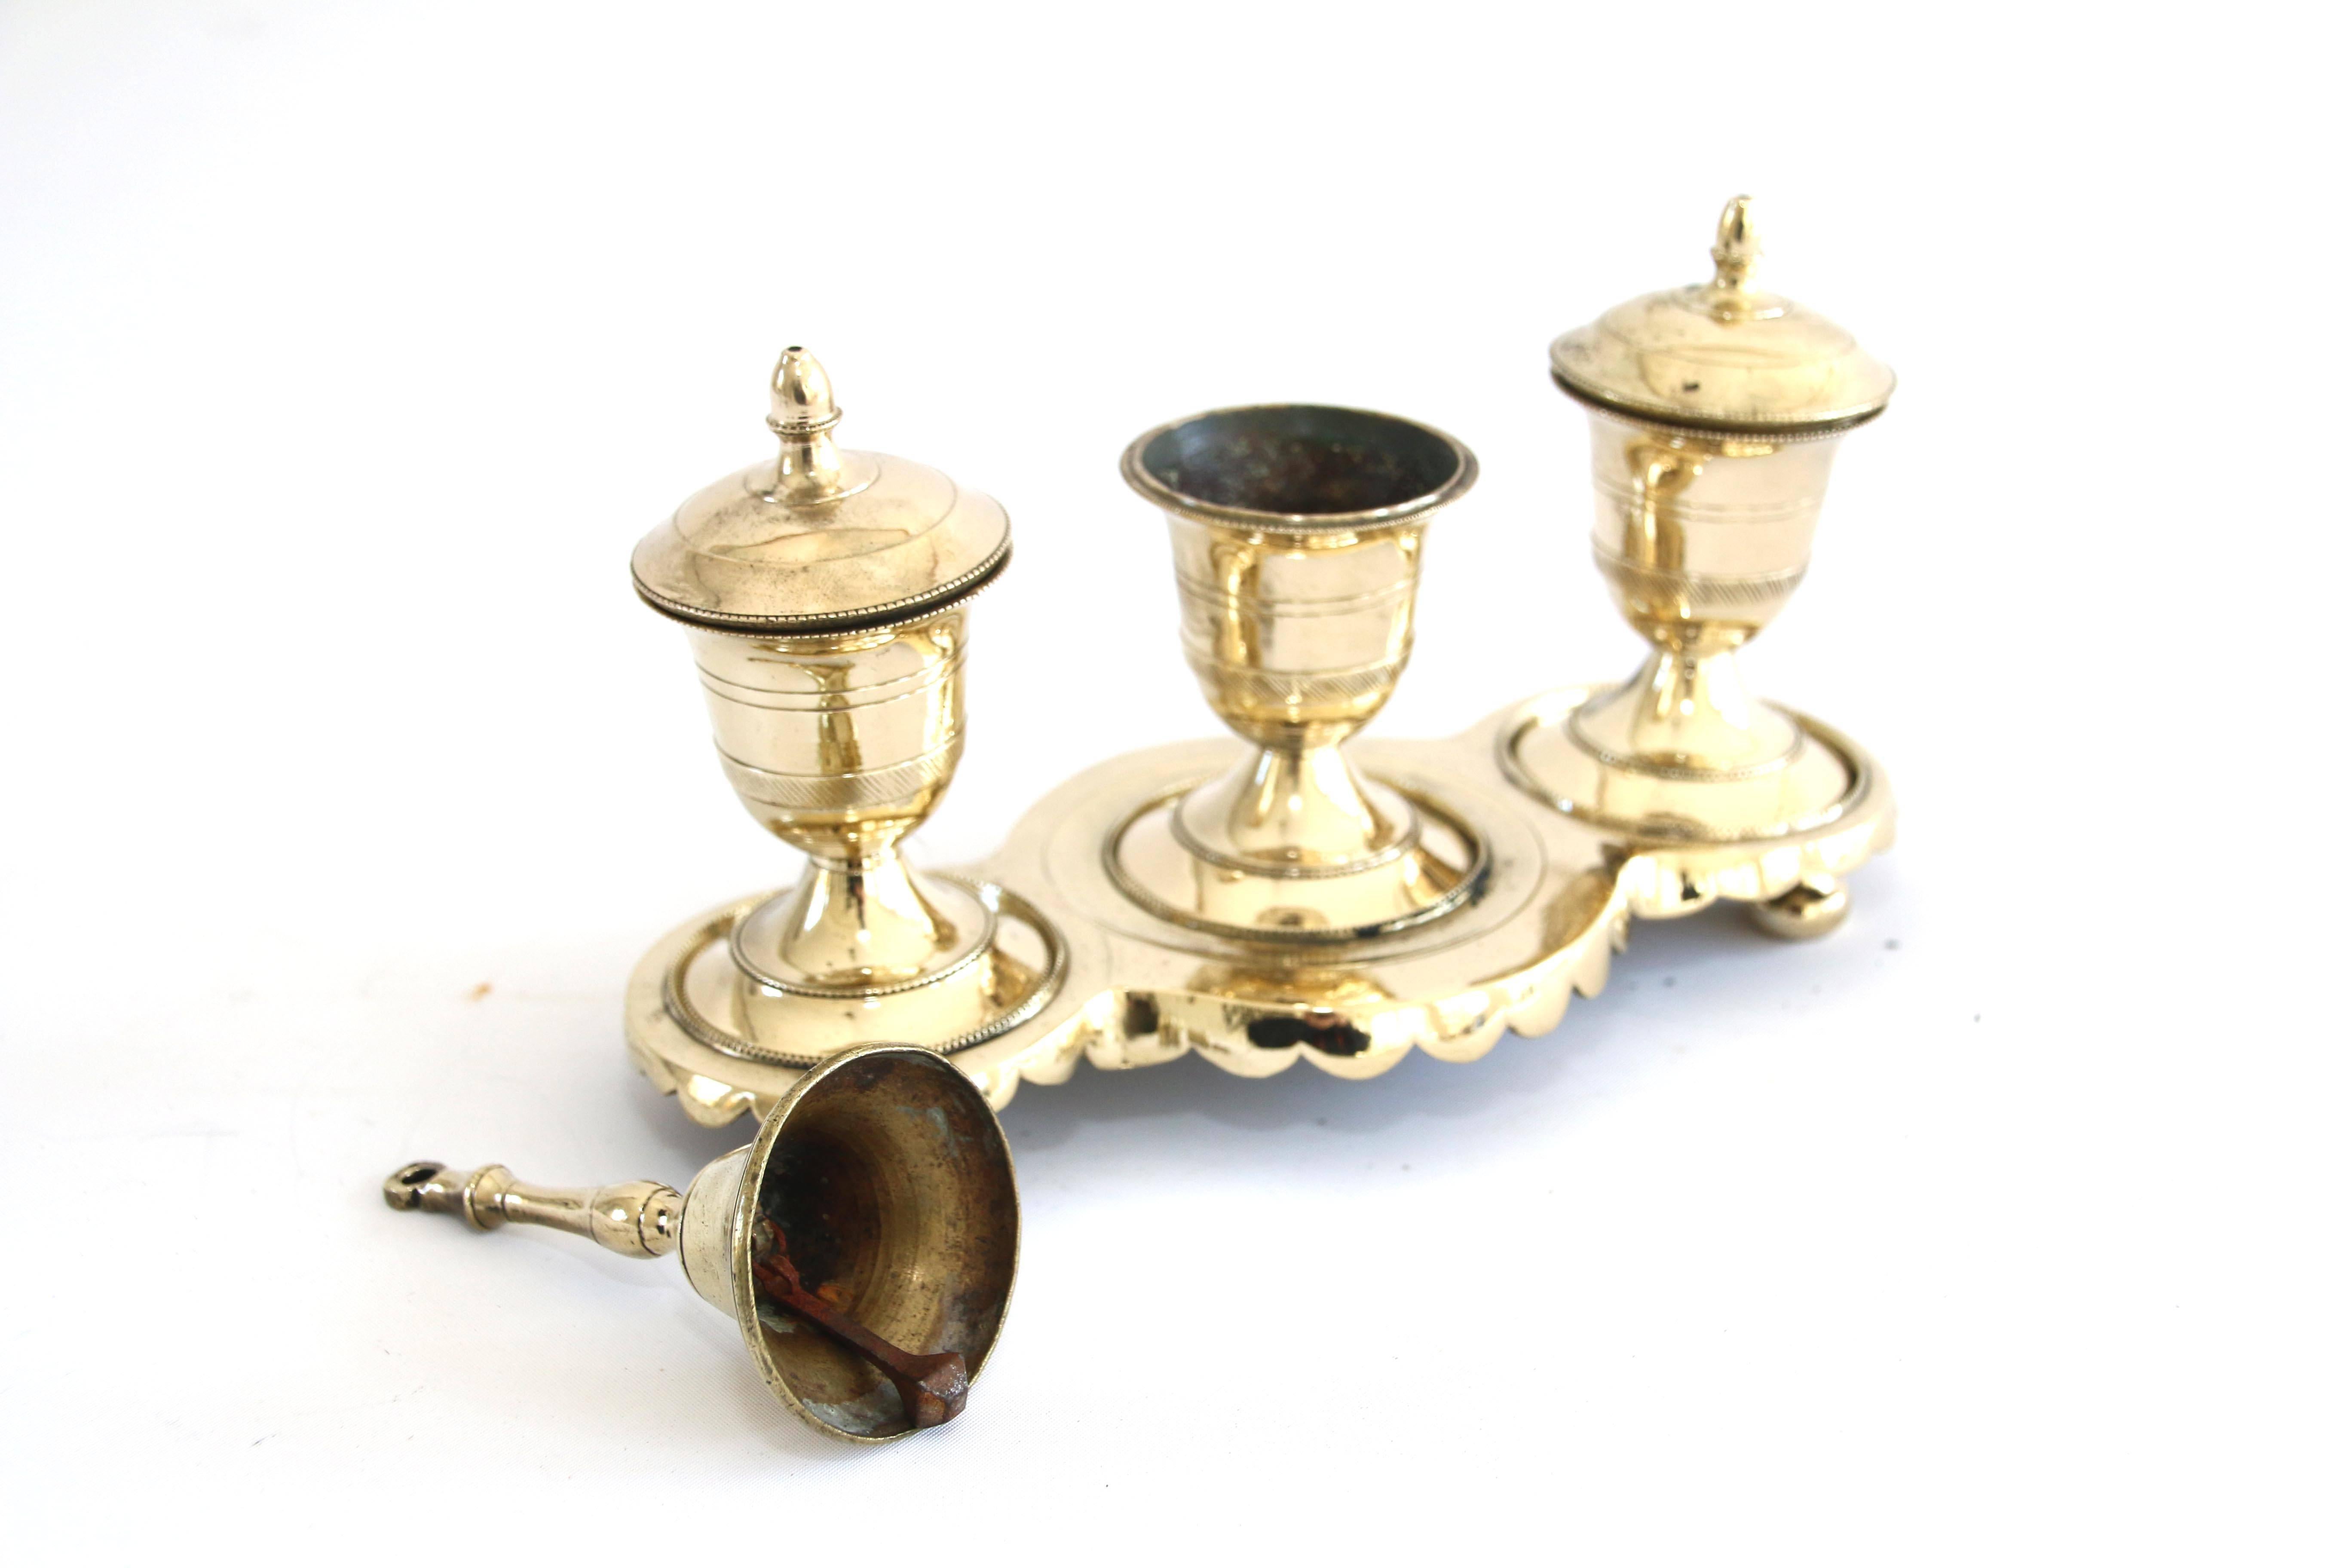 Made in Spain for export in the 18th century, this brass Standish possesses 3 urn-form vessels comprising 2 ink and sealing wax containers, a pounce pot, and service bell. The tripartite base possesses a shaped skirt.

Late 18th Century

7 ½” H X 8